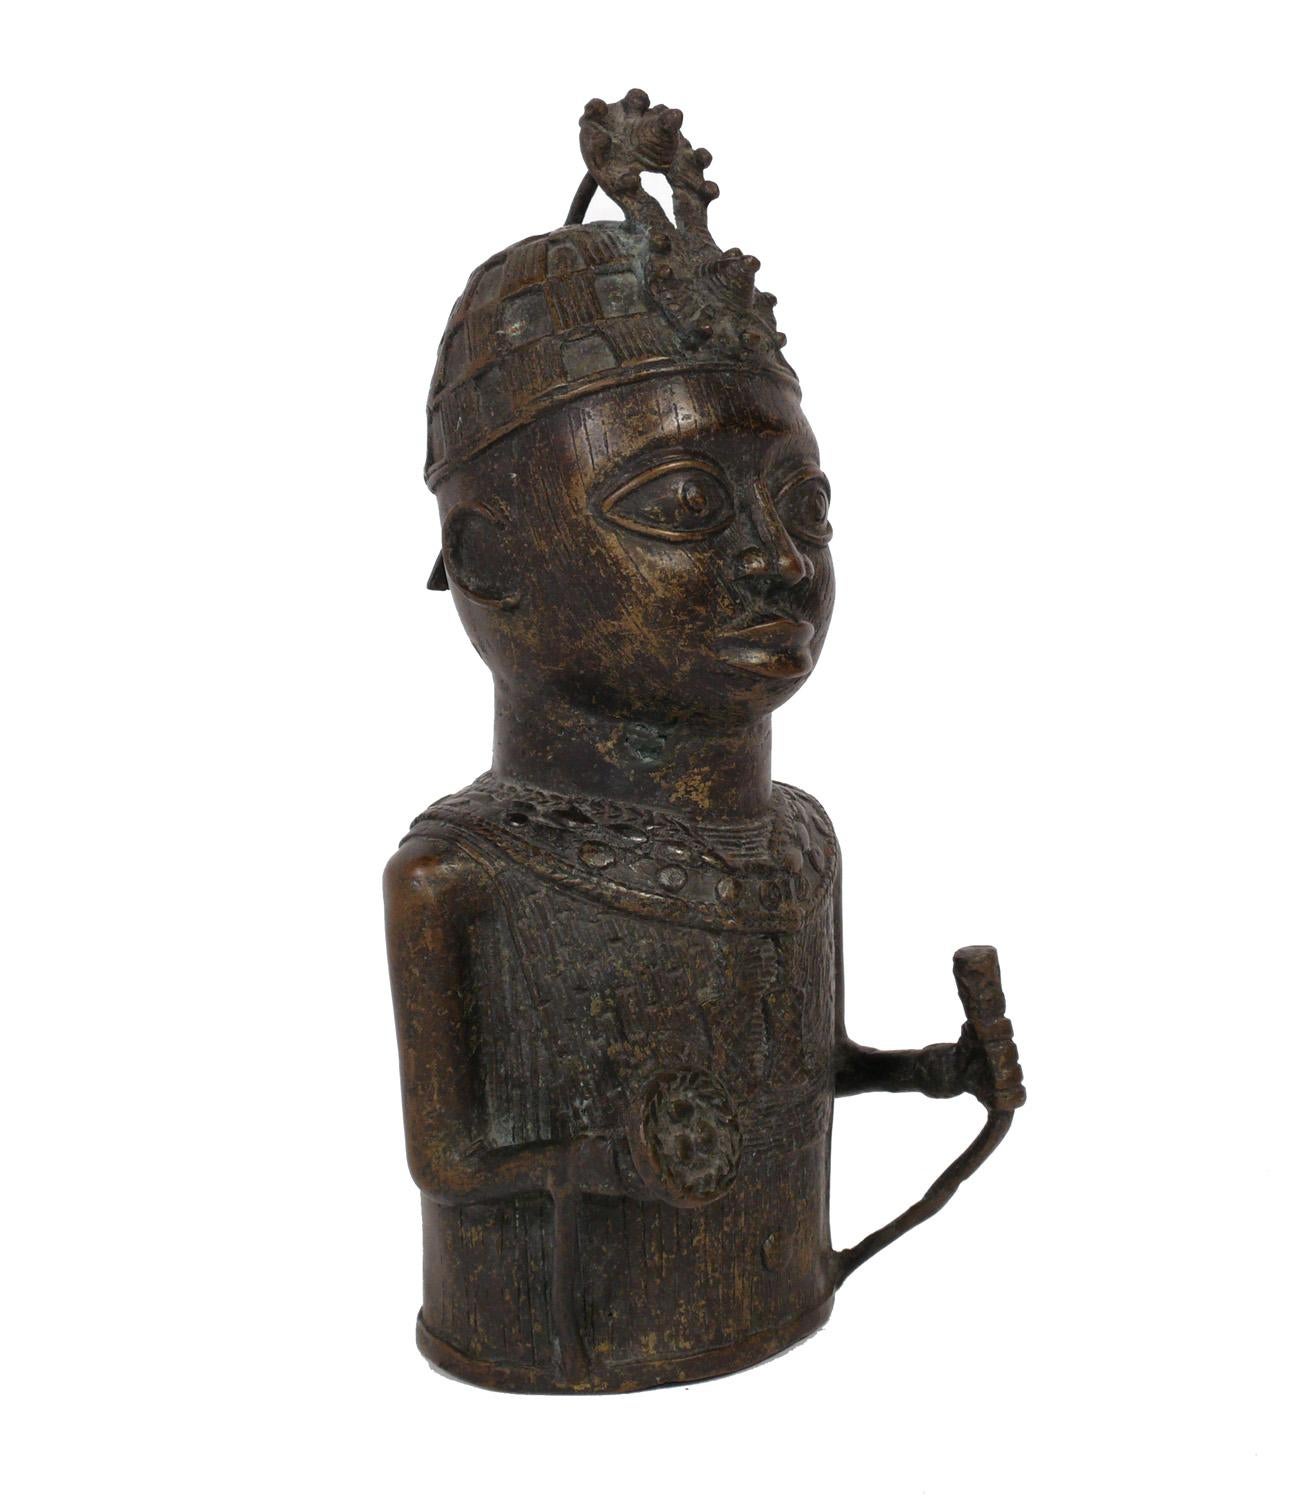 African Benin Bronze Sculpture, Africa, circa mid 20th Century. Beautiful casting with wonderful attention to detail. Solid, heavyweight construction with warm original patina.